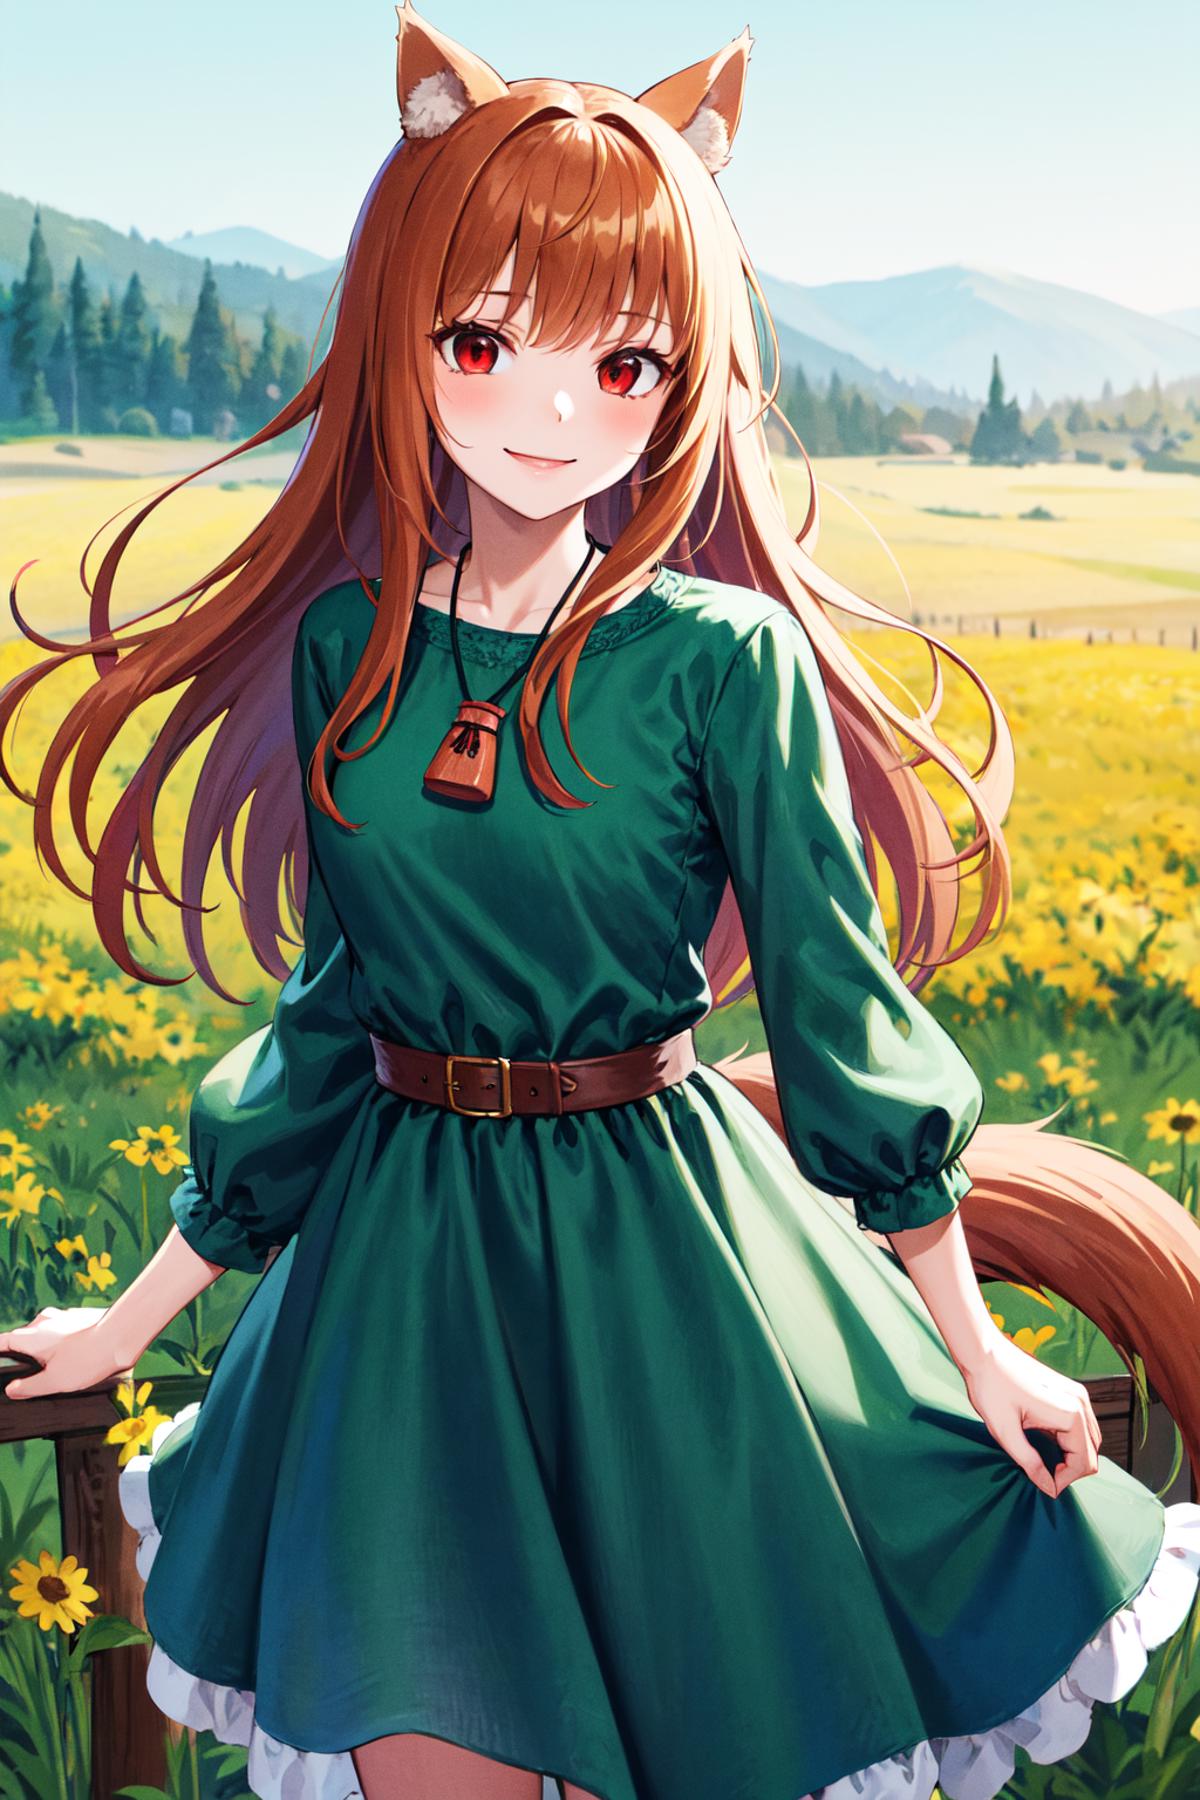 Anime girl with red eyes and a green dress posing in a field.